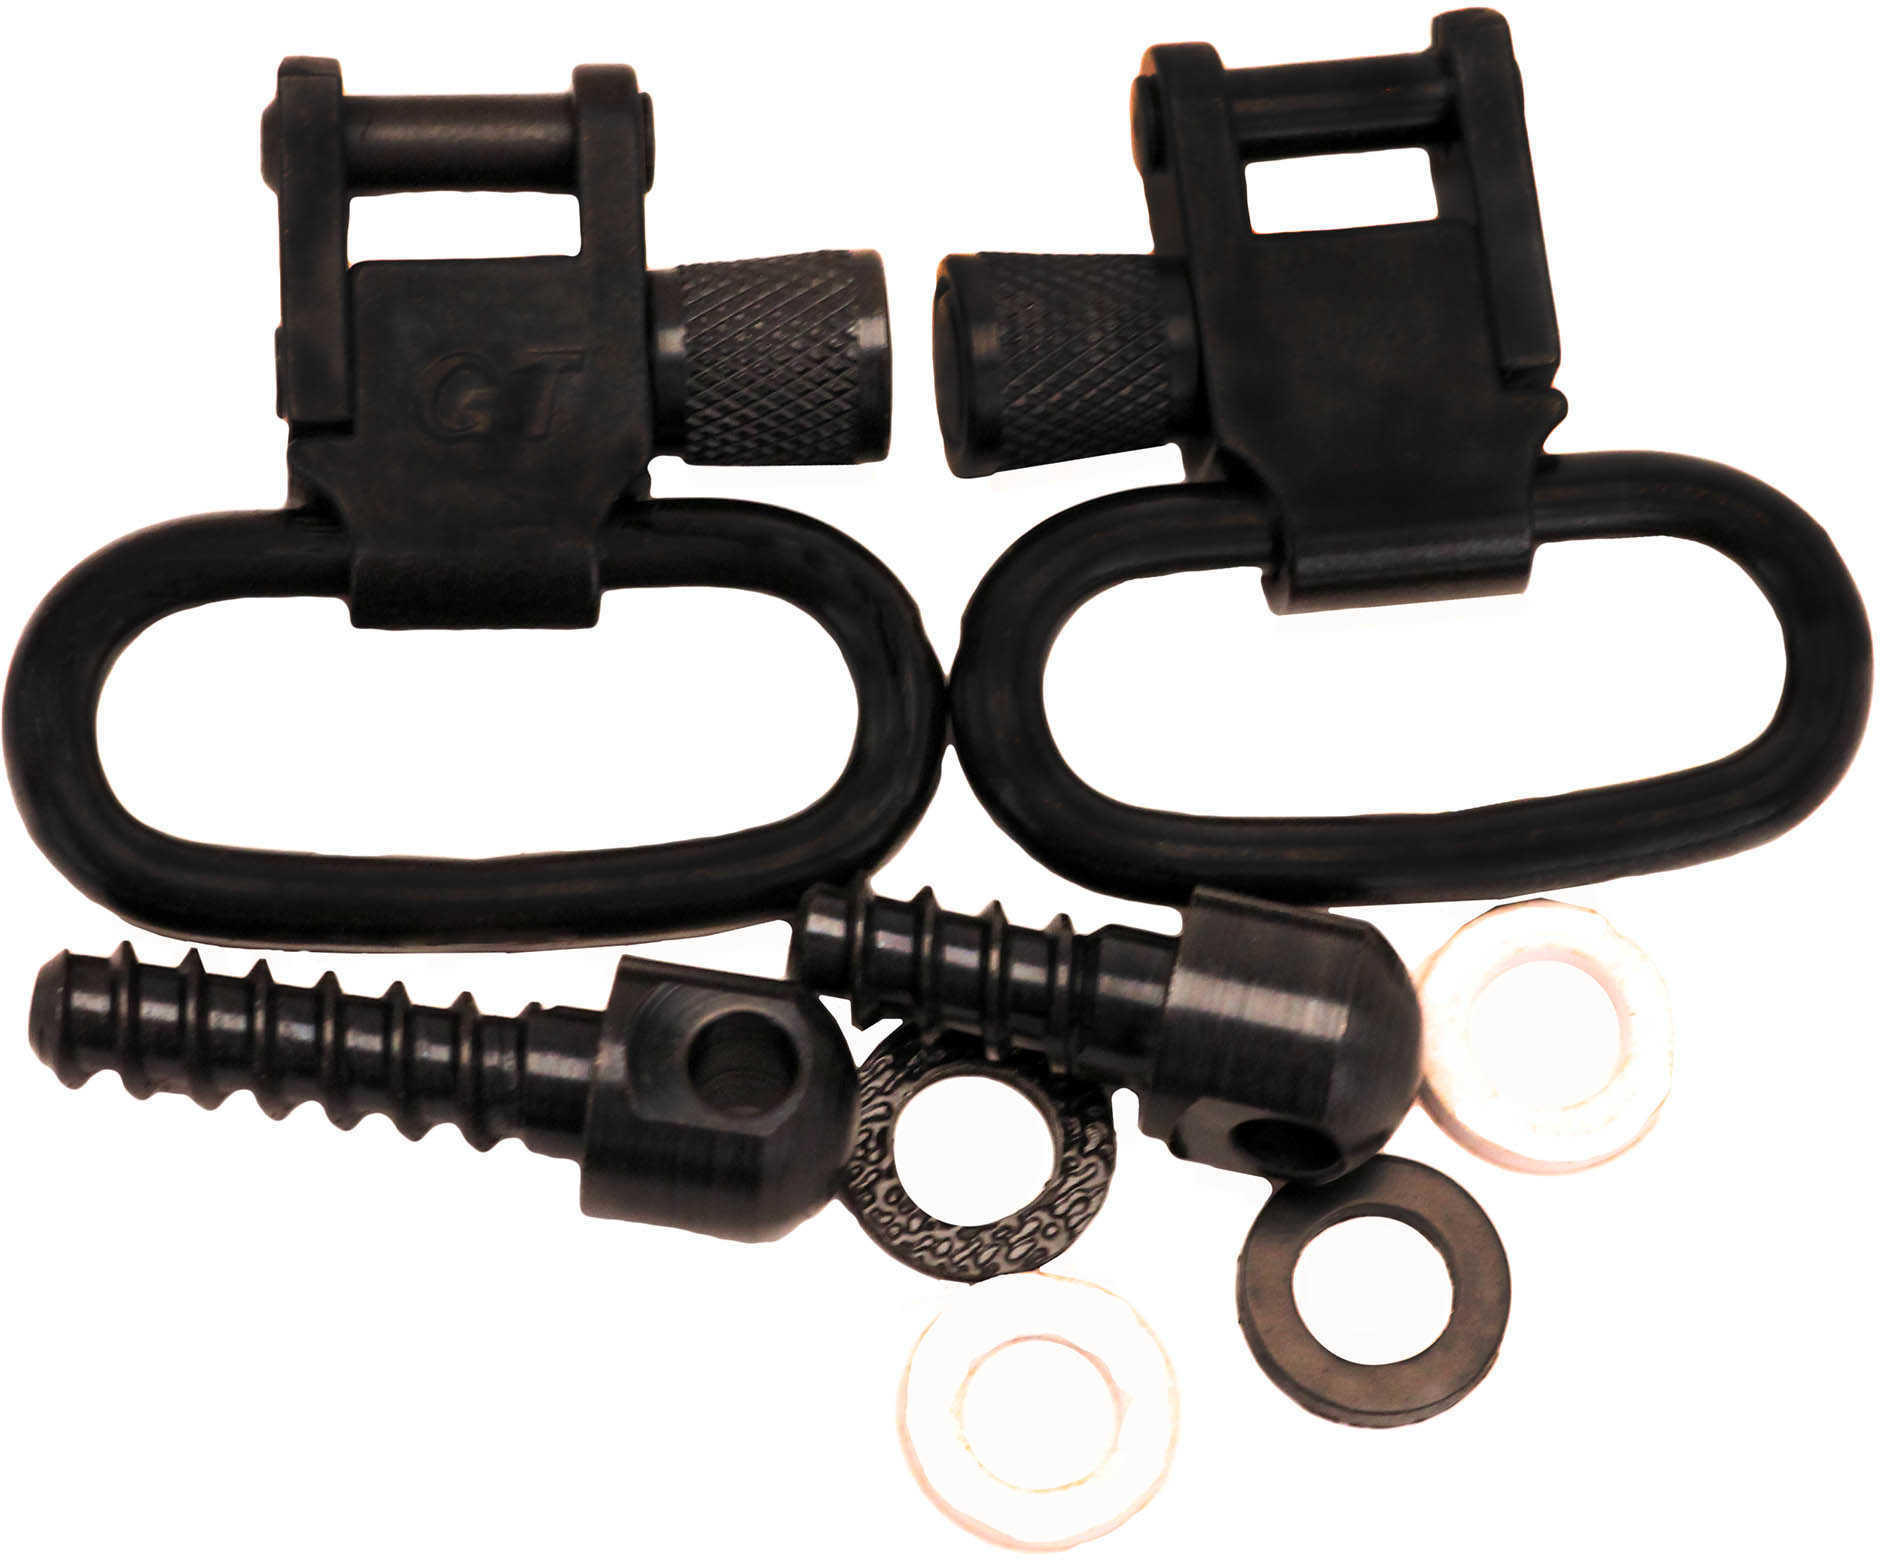 GROVTEC Swivel Set With Two Wood Screw & Spacers Black